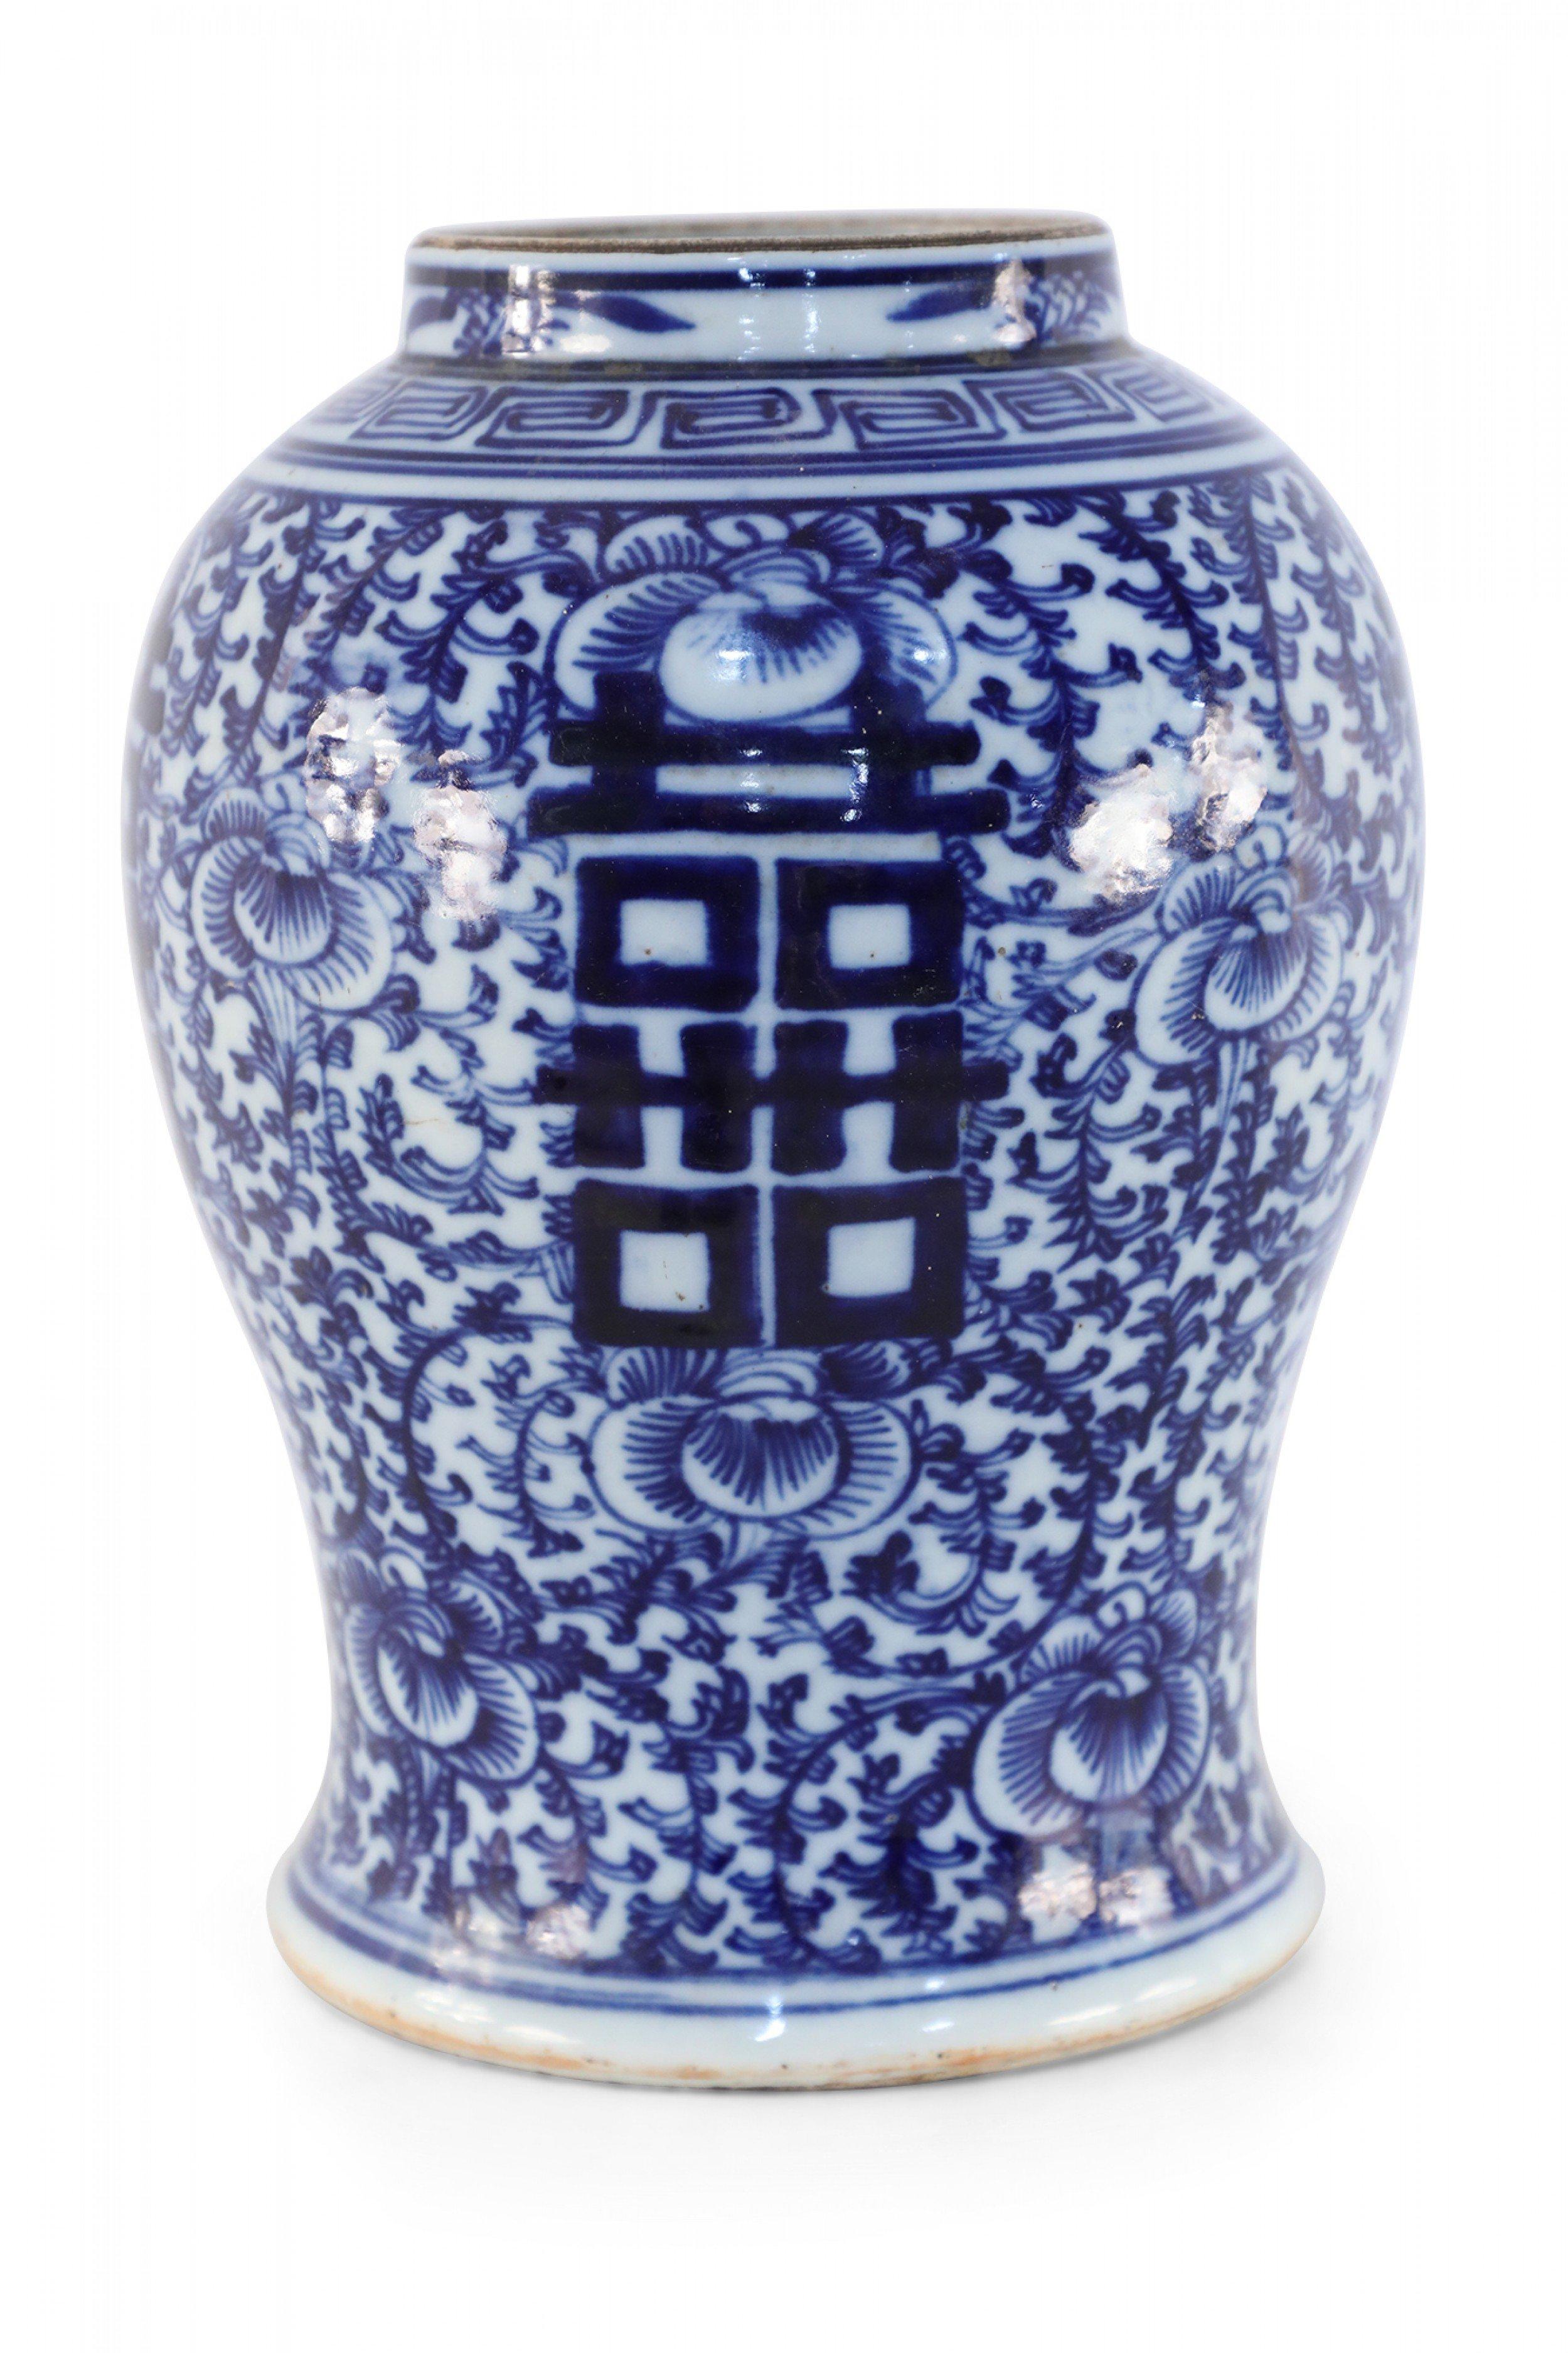 20th Century Chinese Off-White and Navy Vine Motif Porcelain Urn Vase For Sale